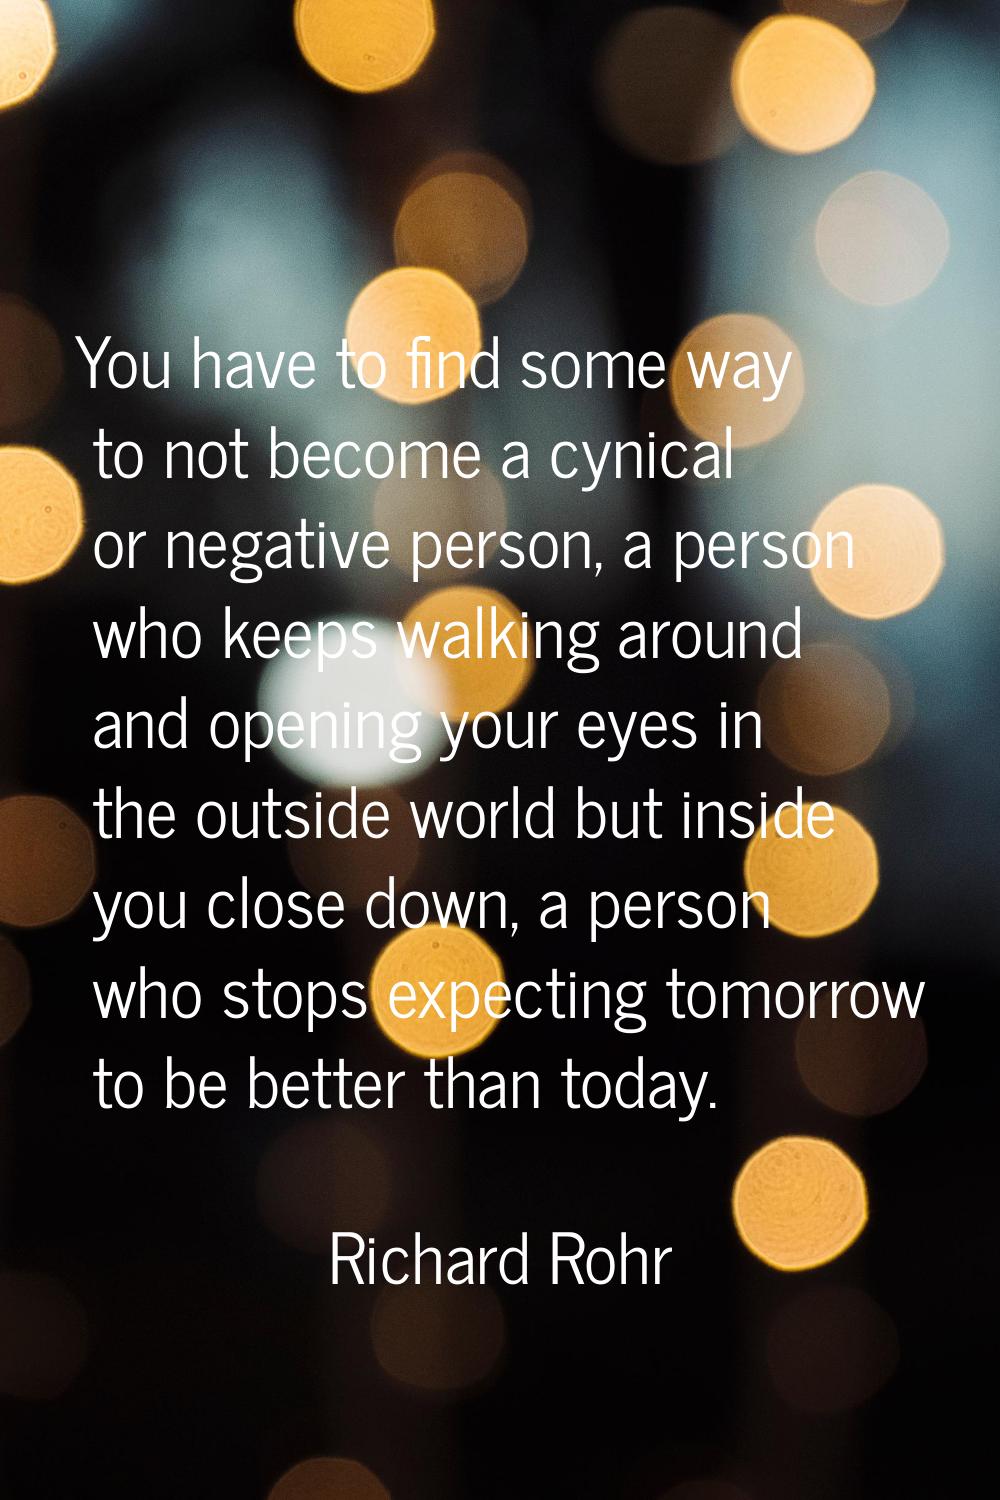 You have to find some way to not become a cynical or negative person, a person who keeps walking ar